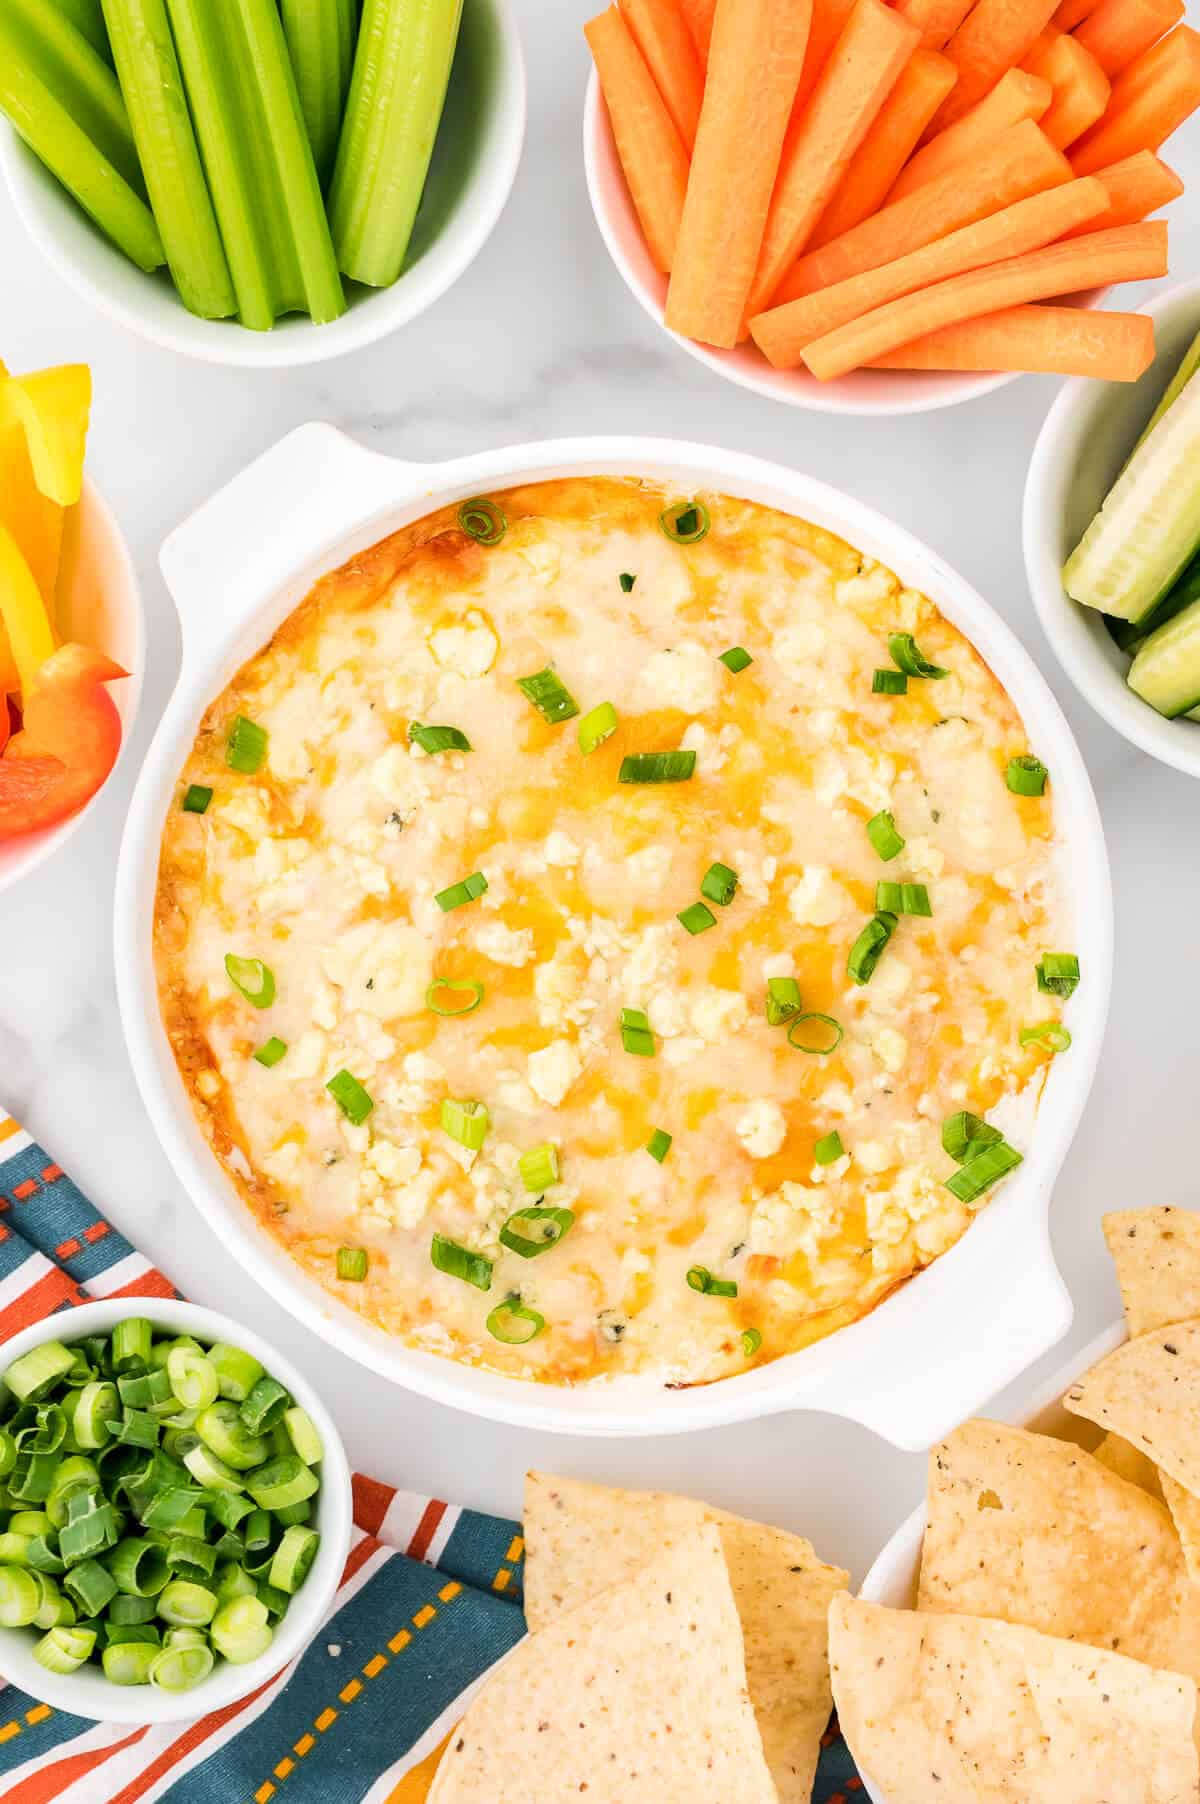 Buffalo chicken dip surrounded by veggies and tortilla chips.